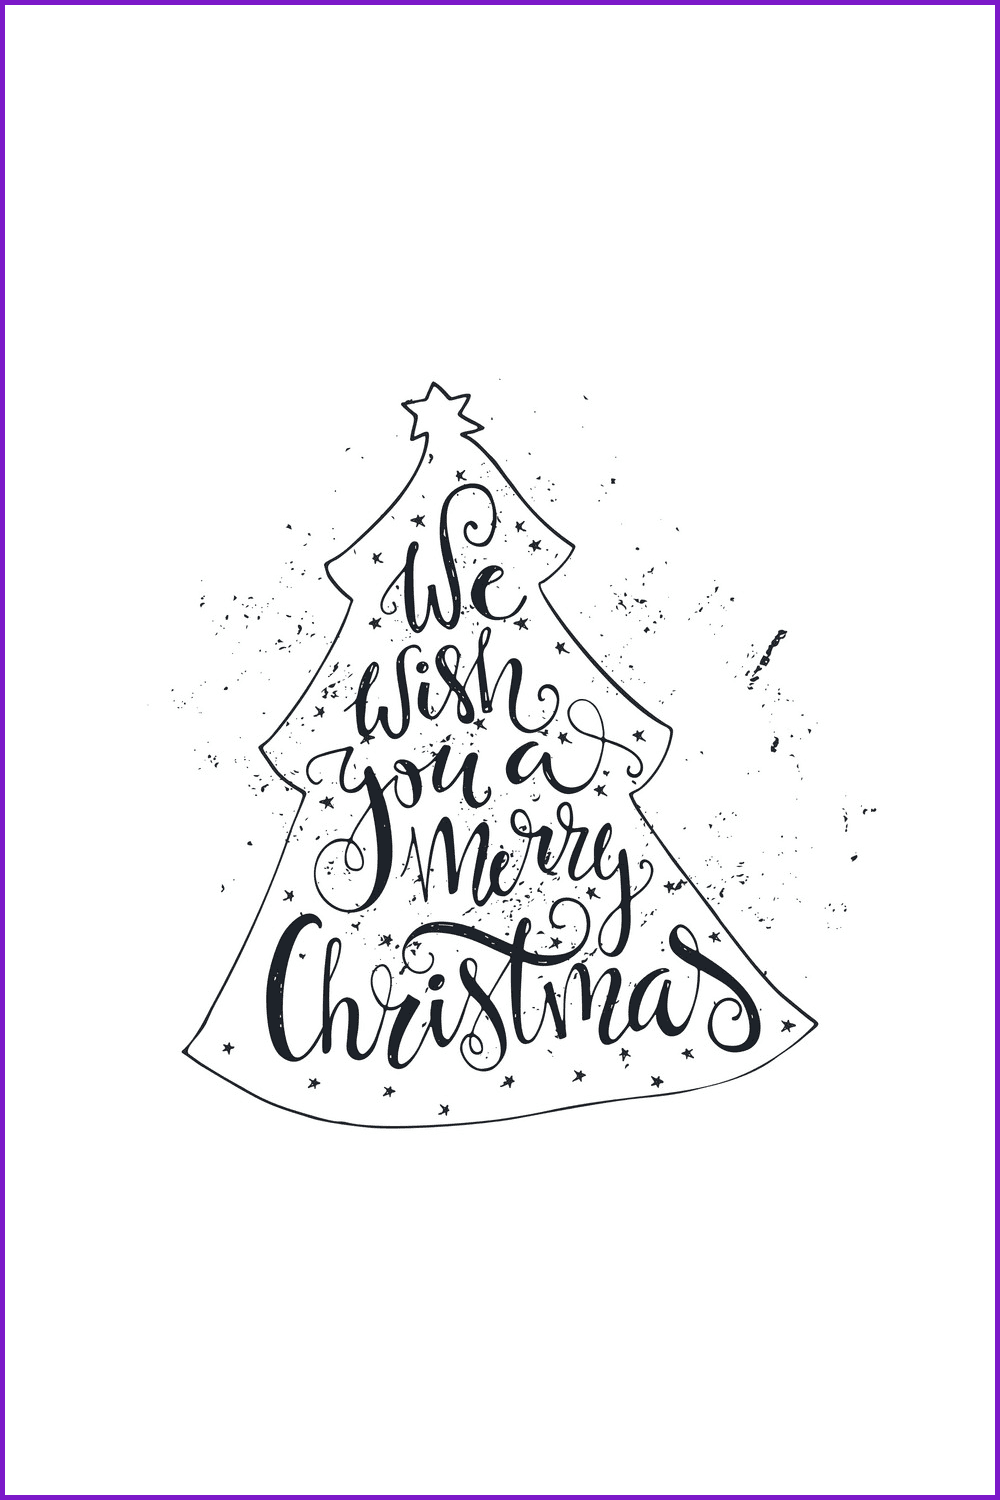 The shape of a Christmas tree with the text We wish you a Merry Christmas.